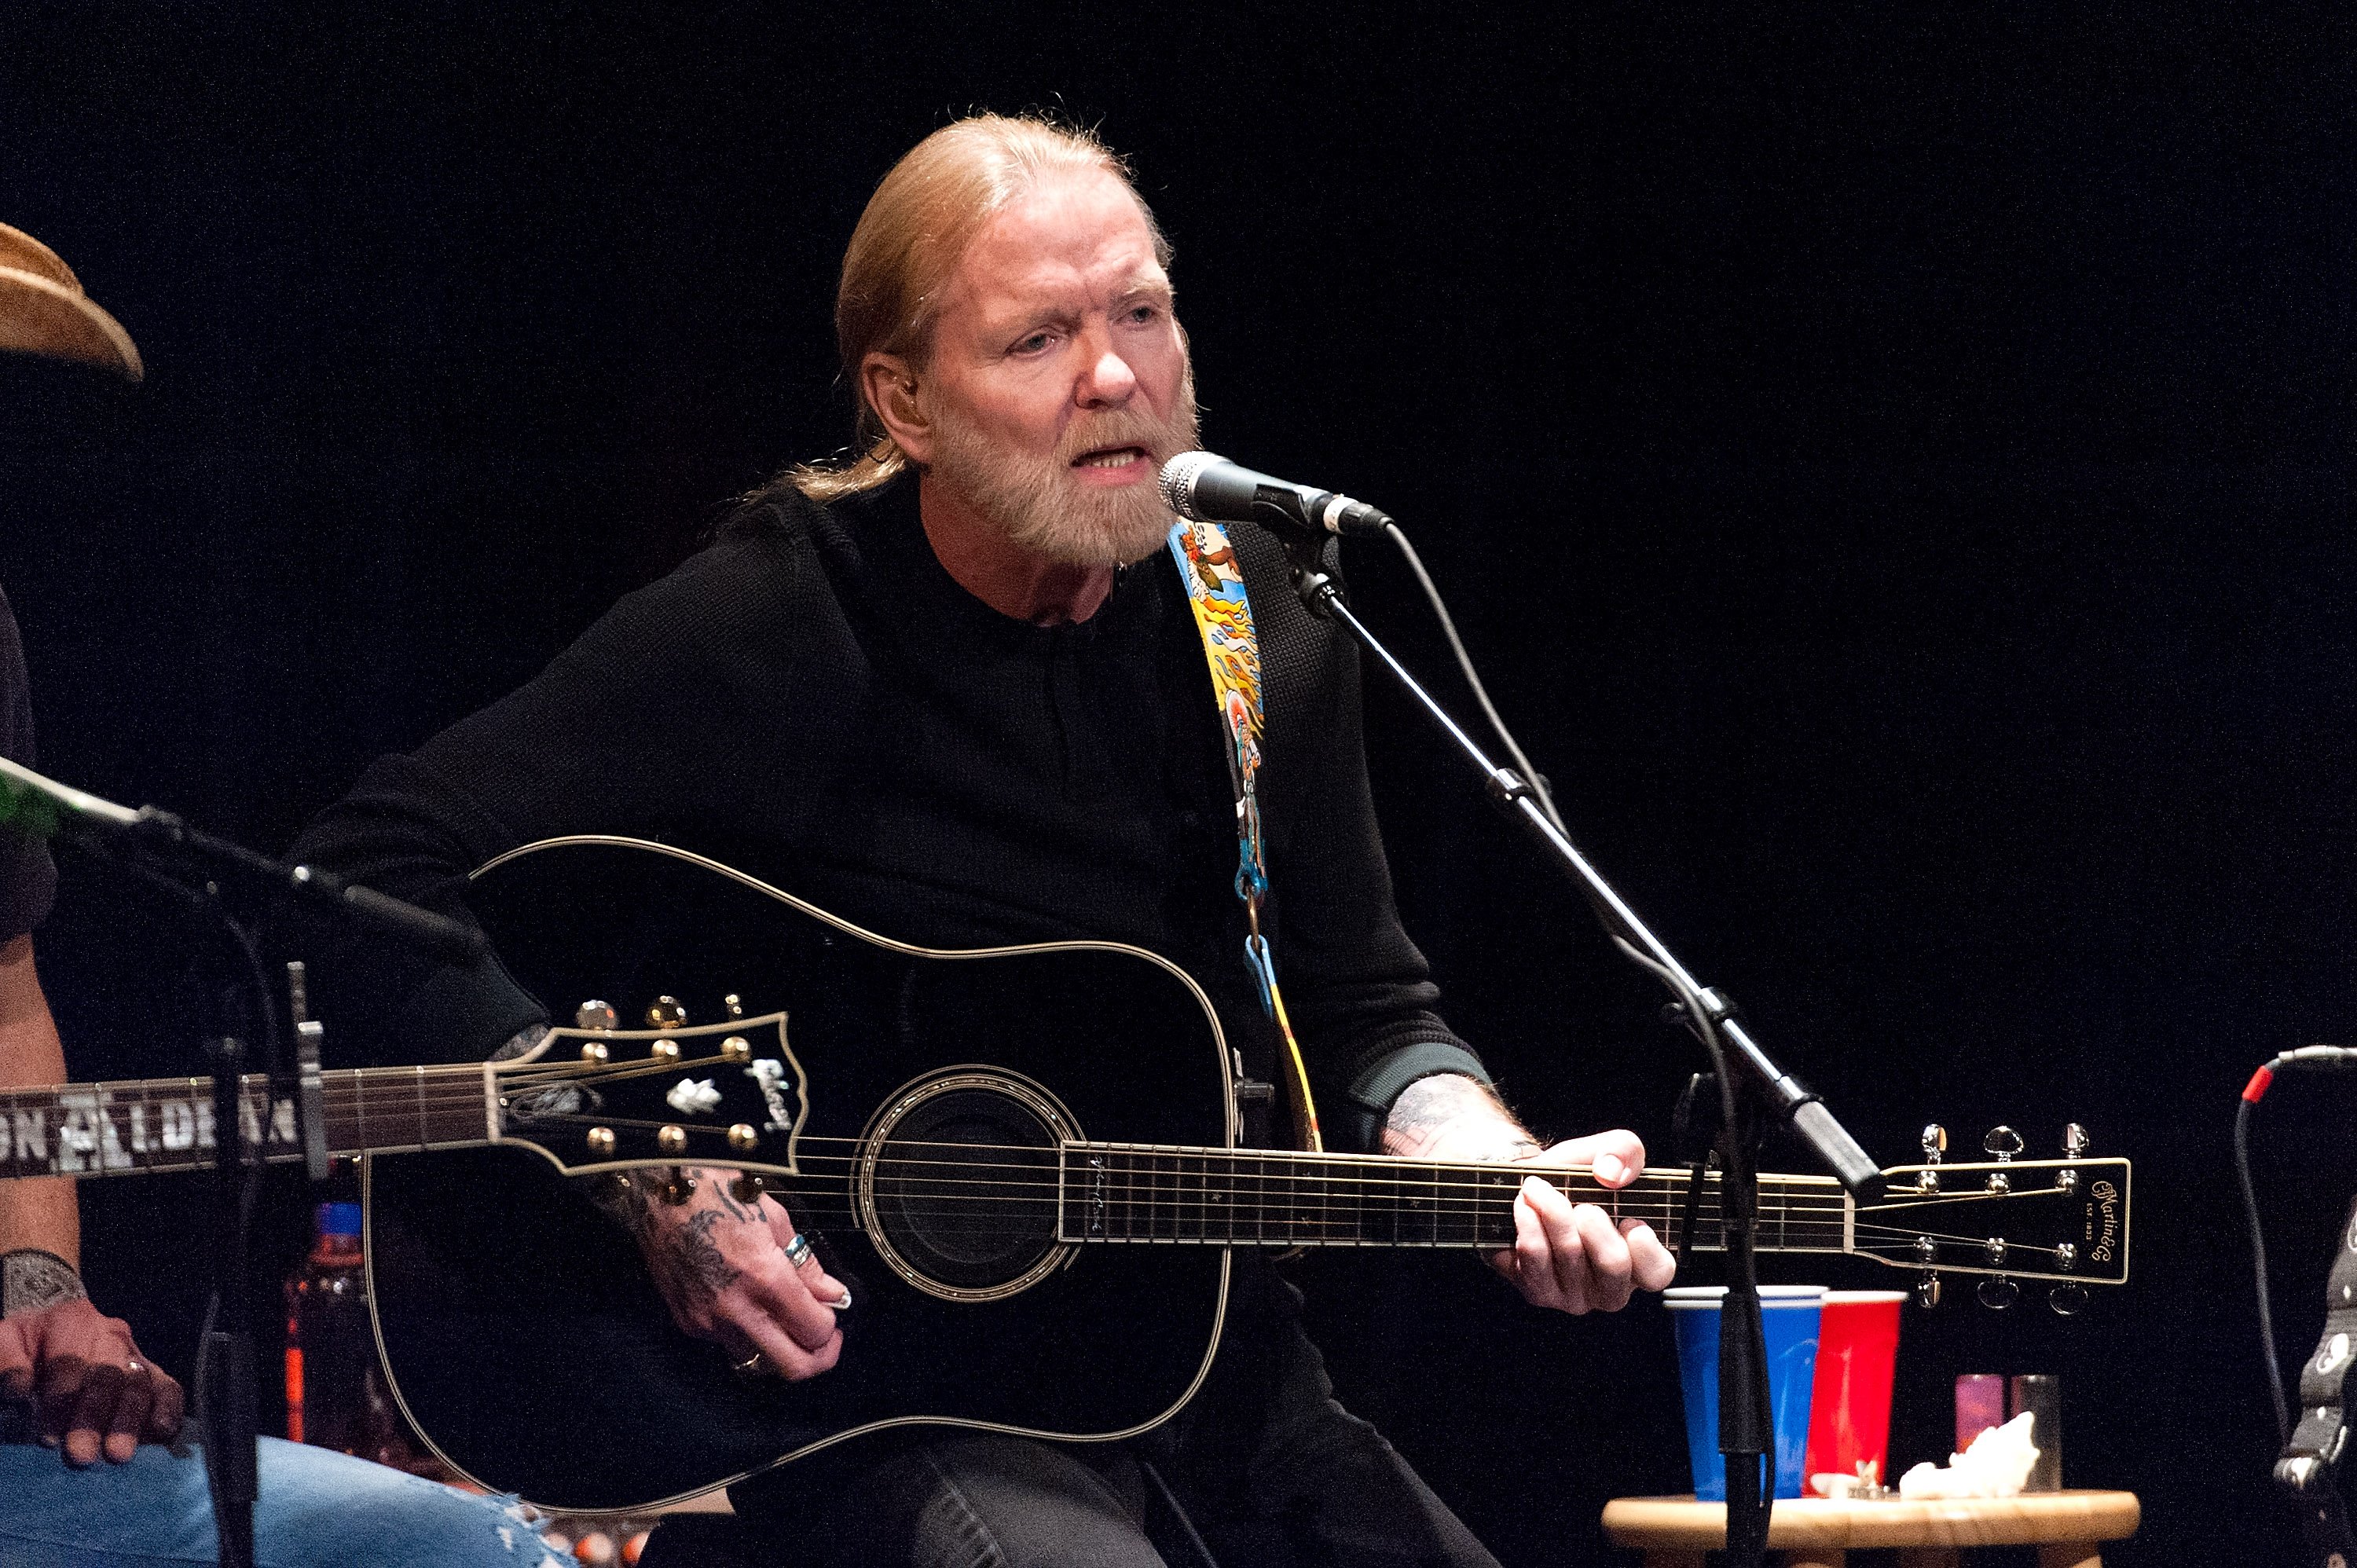 Gregg Allman performs at the All For The Hall New York concert at the Best Buy Theater on February 26, 2013, in New York City. | Source: Getty Images